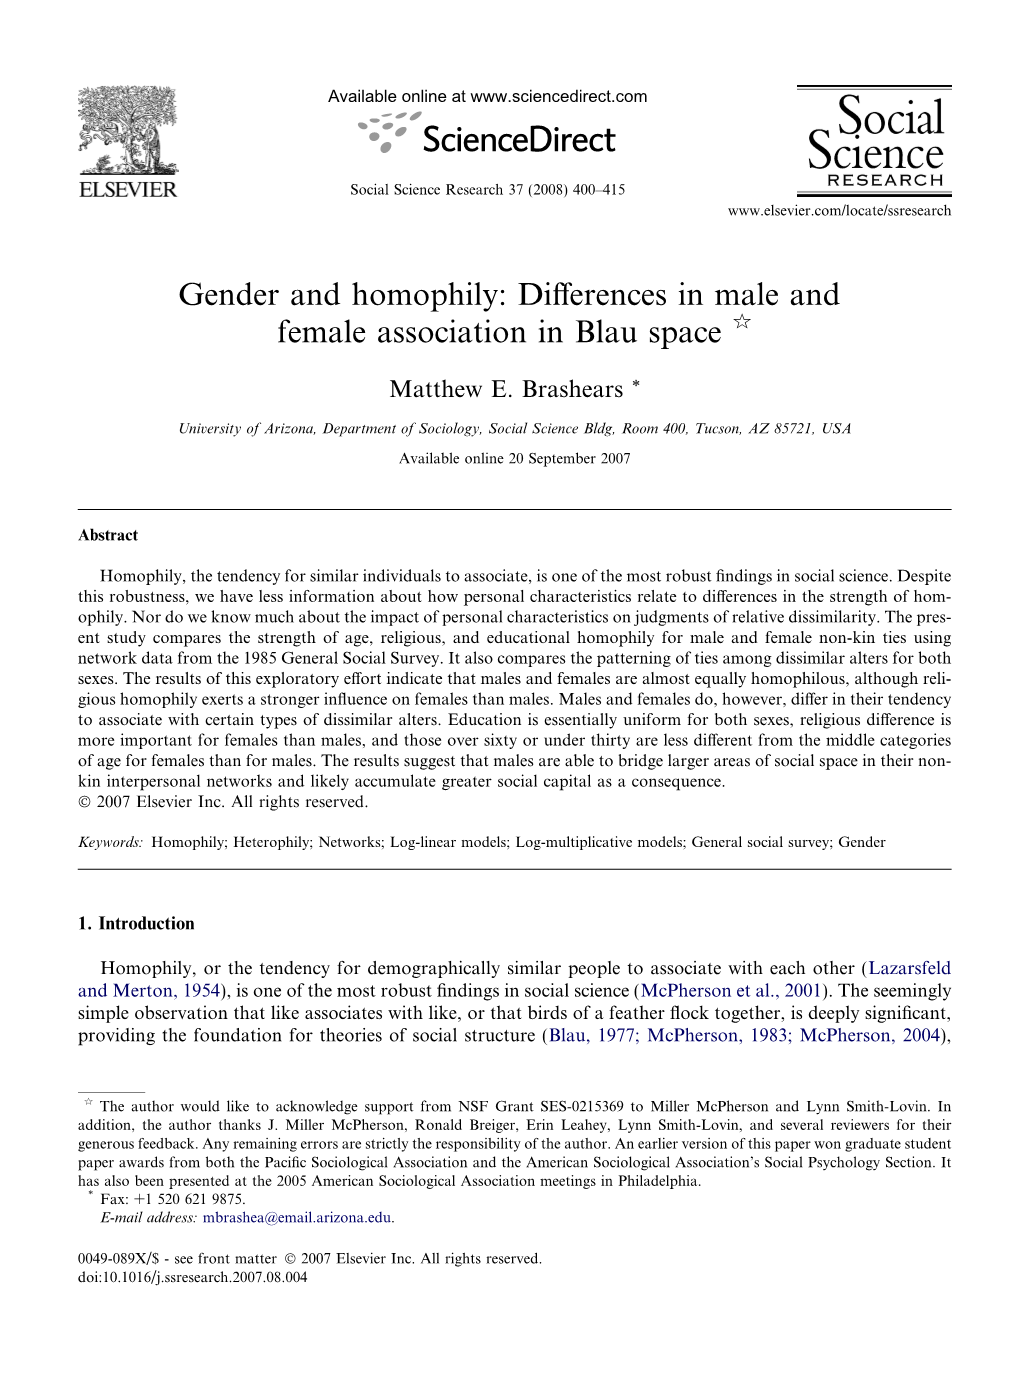 Gender and Homophily: Differences in Male and Female Association In